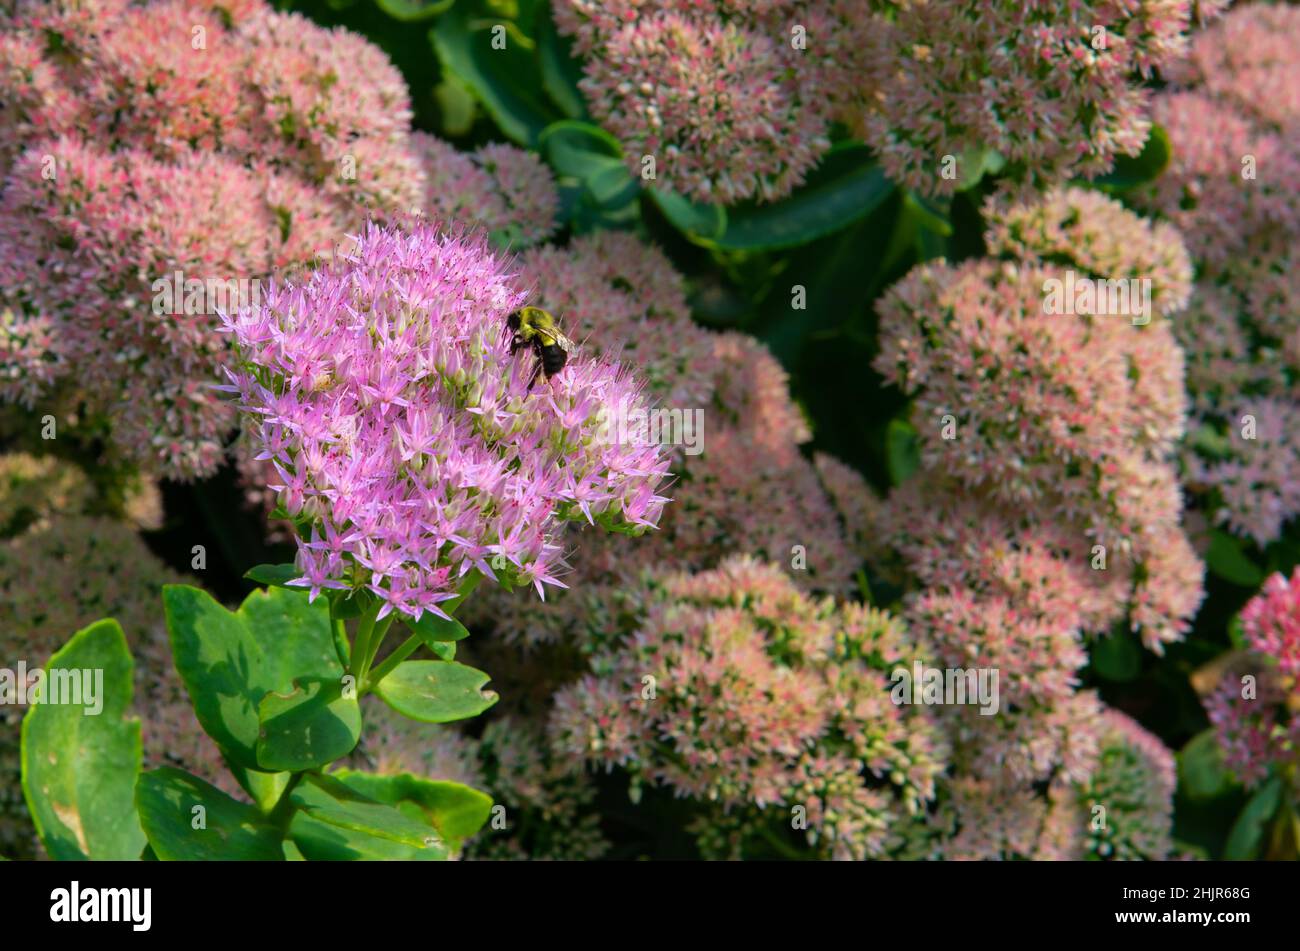 Beautiful photo of a Carpenter or Honey Bee,feeding on a purple sedum flower. Sedum flowers are commonly known as spreading stone crops or autumn joy. Stock Photo